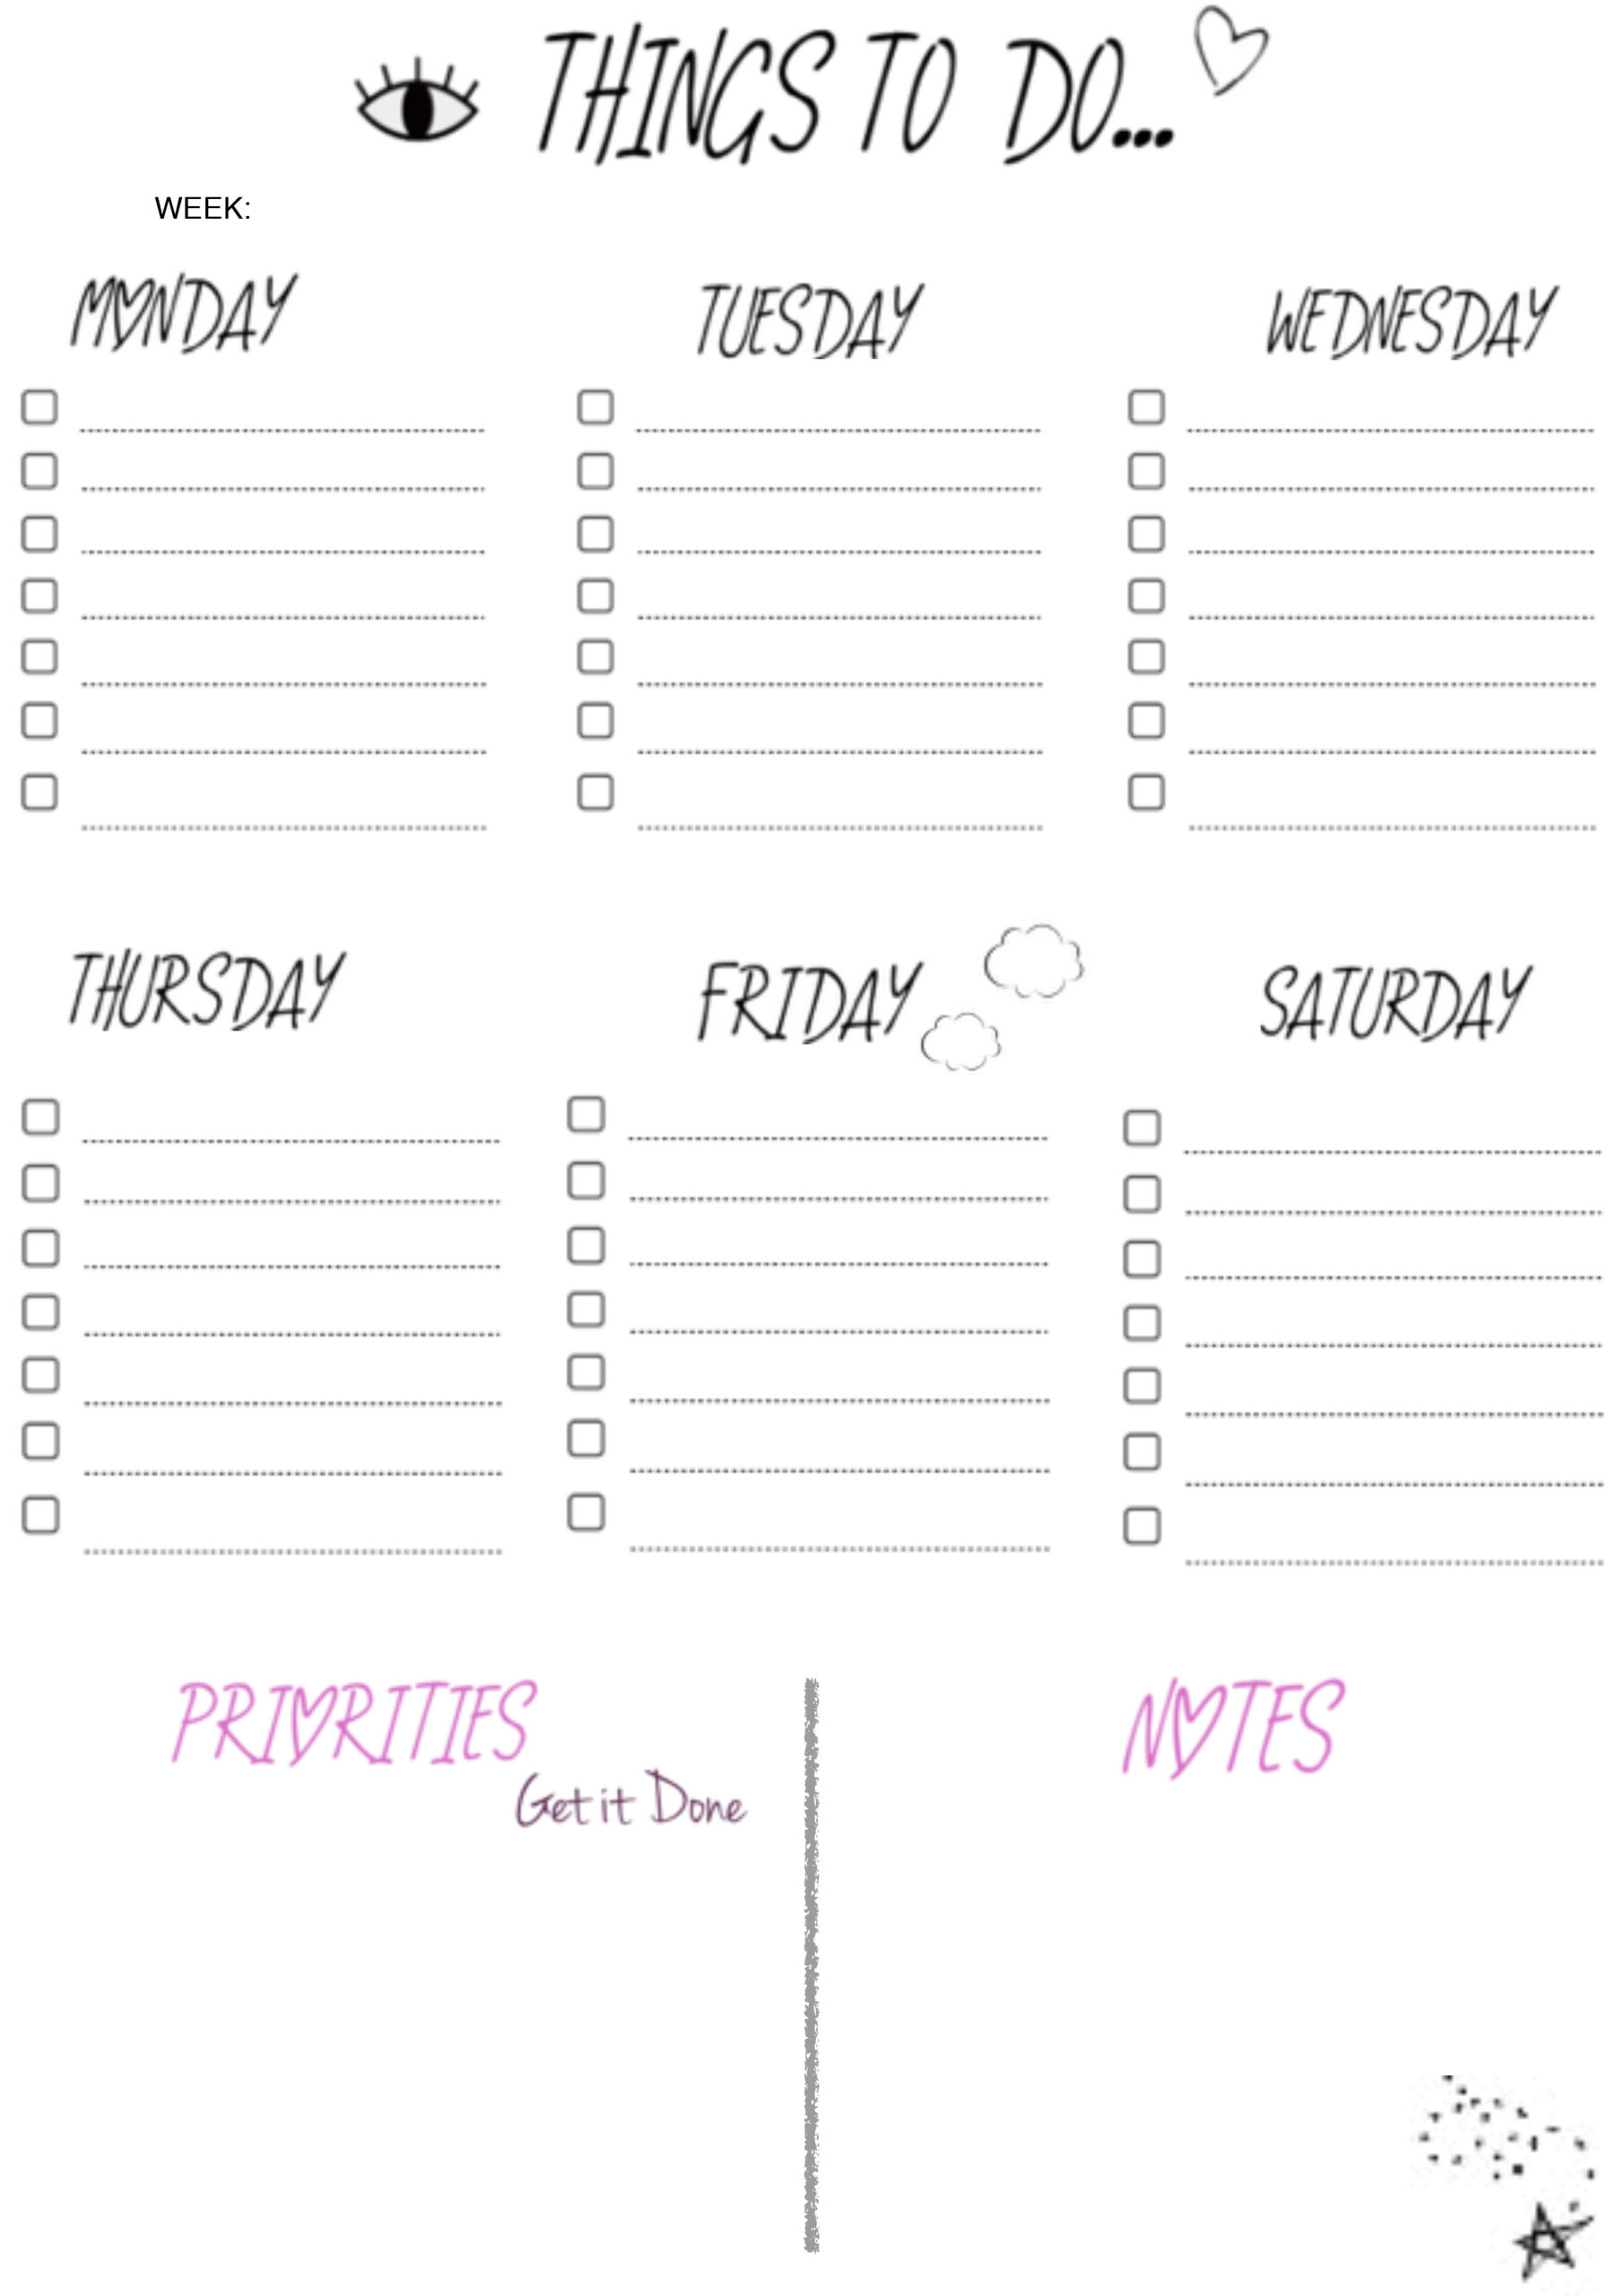 Weekly Things To Do List Printable